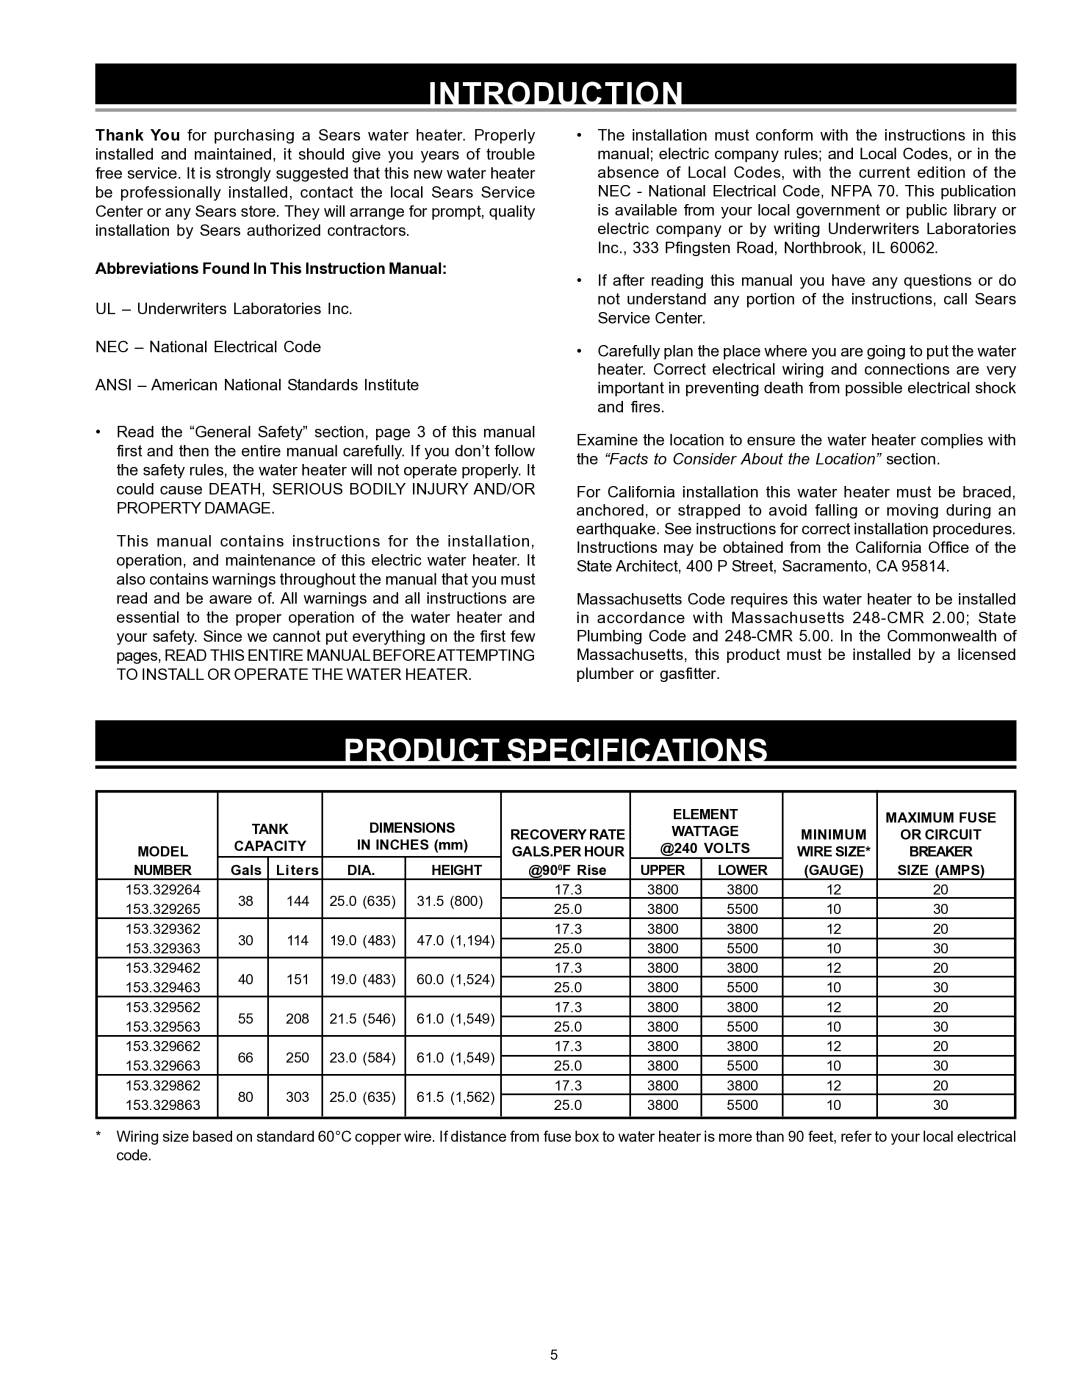 Sears 153.329264 owner manual Introduction, Product Specifications 